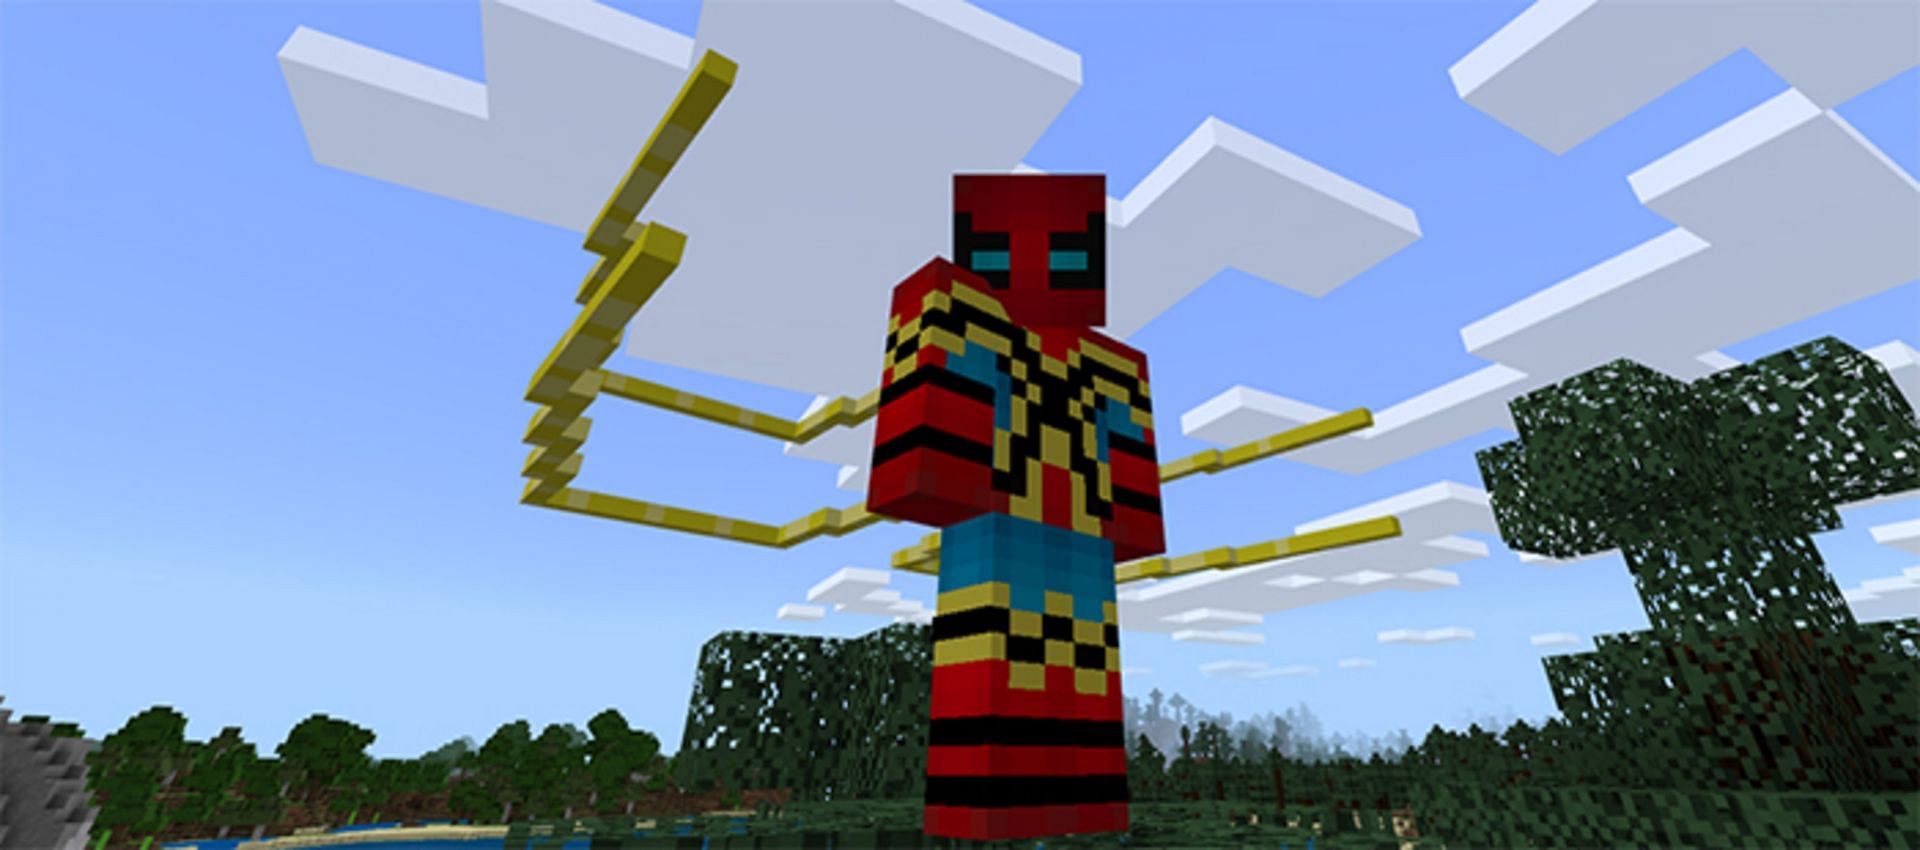 The MCU version of the &quot;Iron Spider&quot; suit from the Avengers and recent Spider-Man films (Image via MrMineChest/Mcpedl)